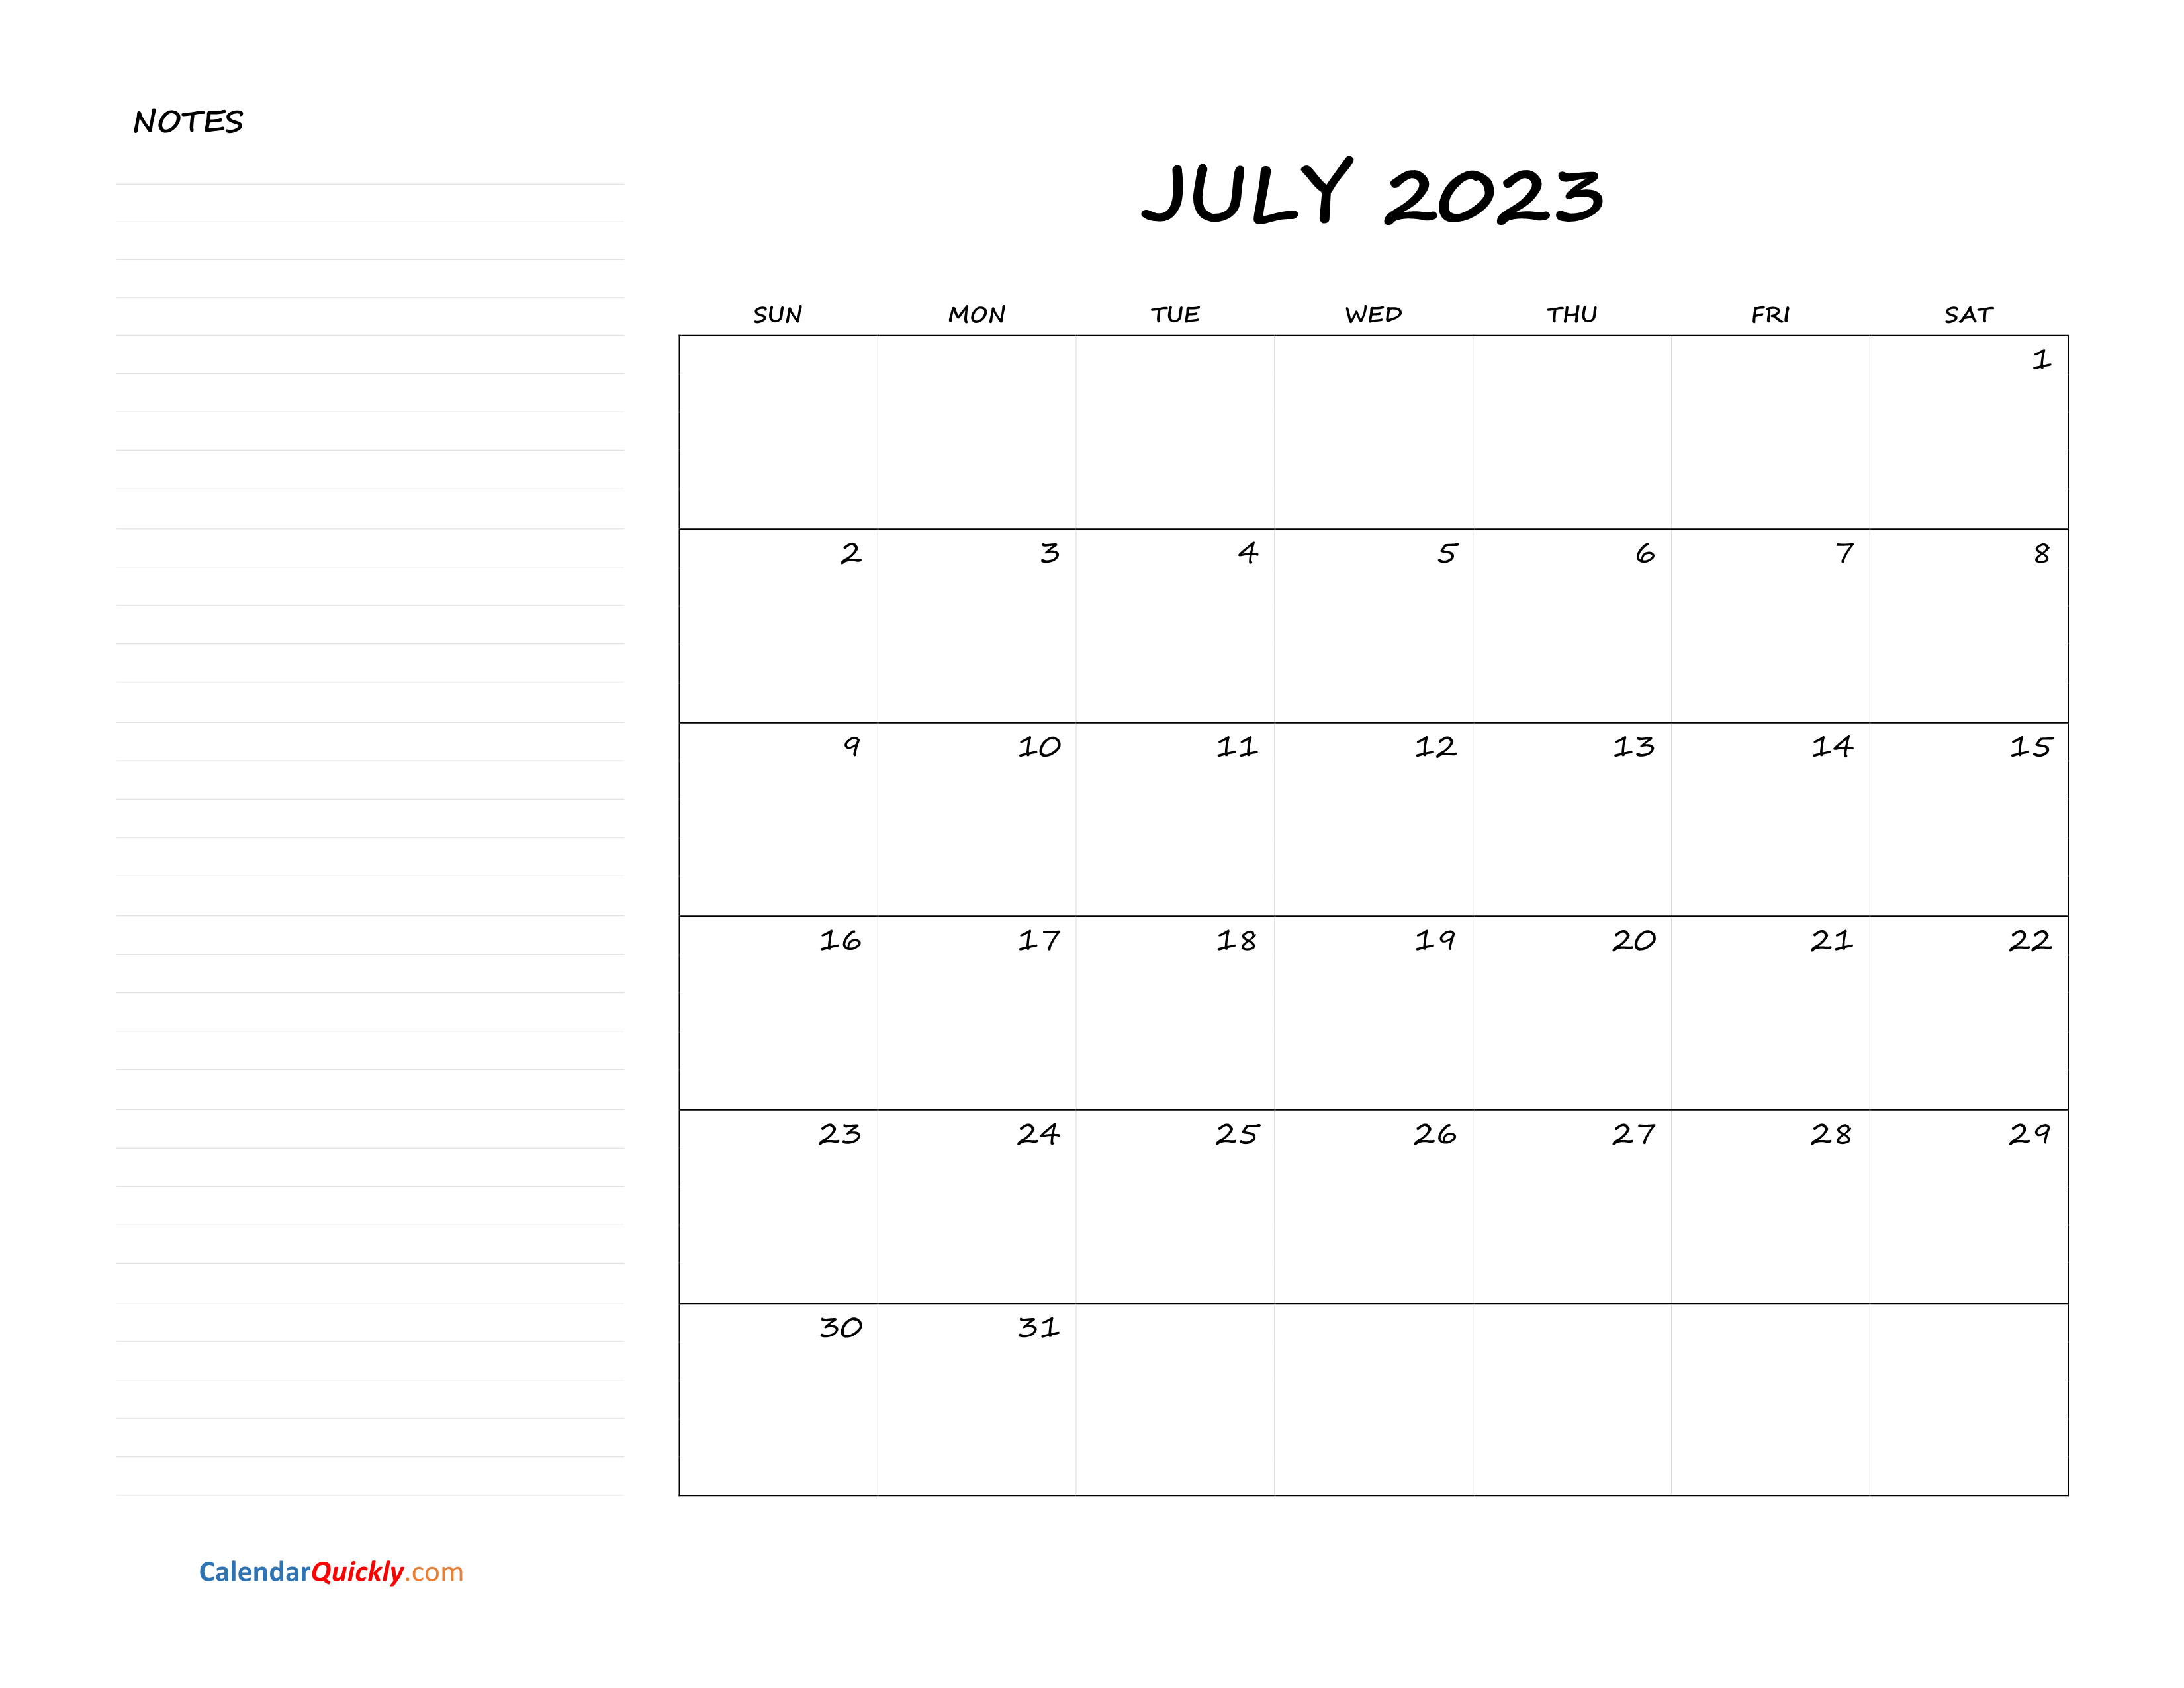 July Blank Calendar 2023 with Notes Calendar Quickly